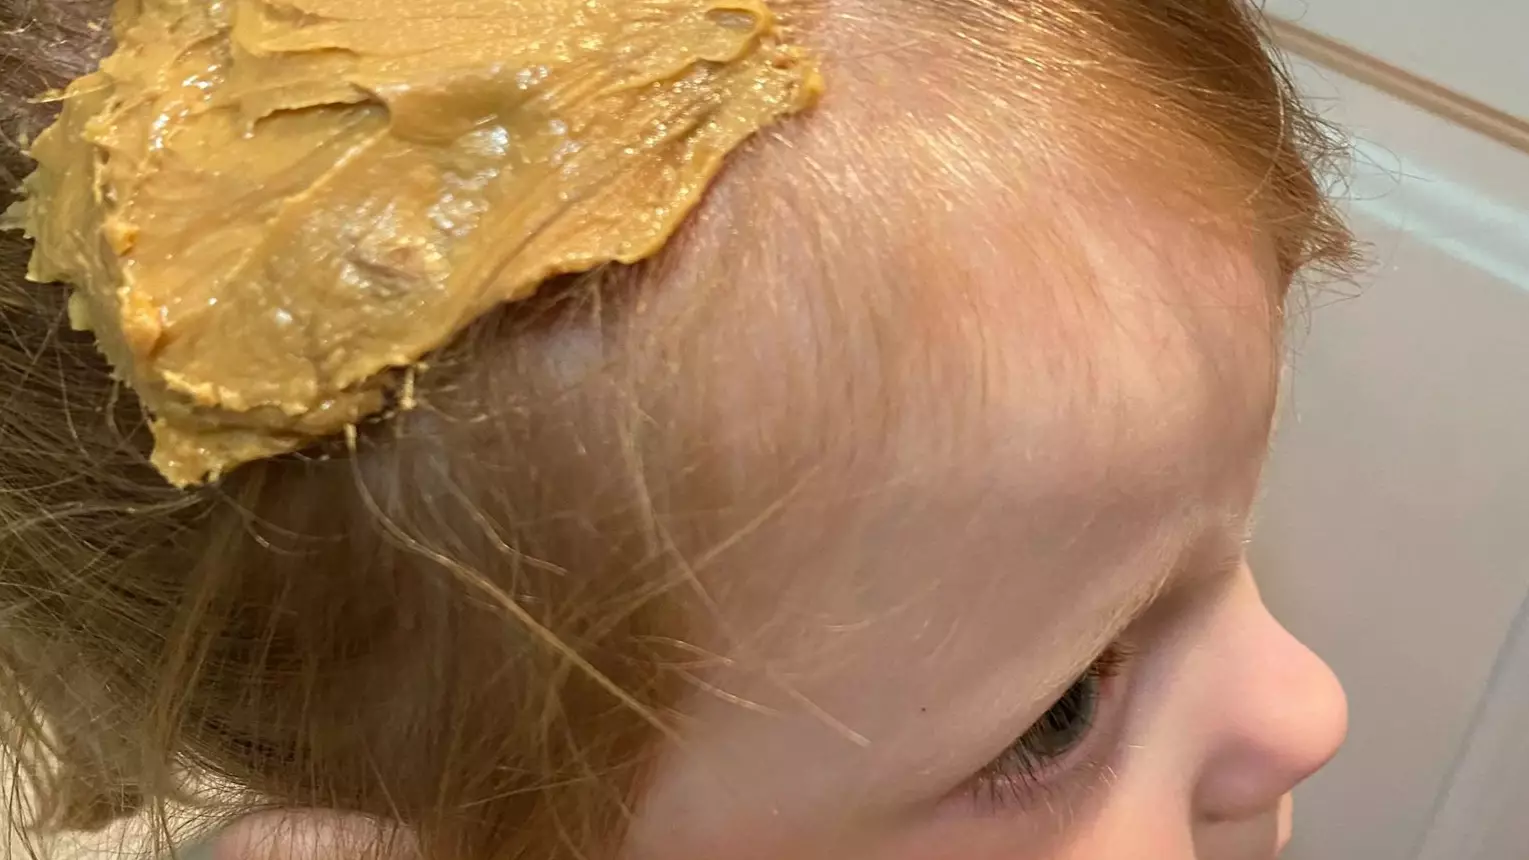 Mum Uses Genius Peanut Butter Hack To Get Gum Out Her Daughter's Hair